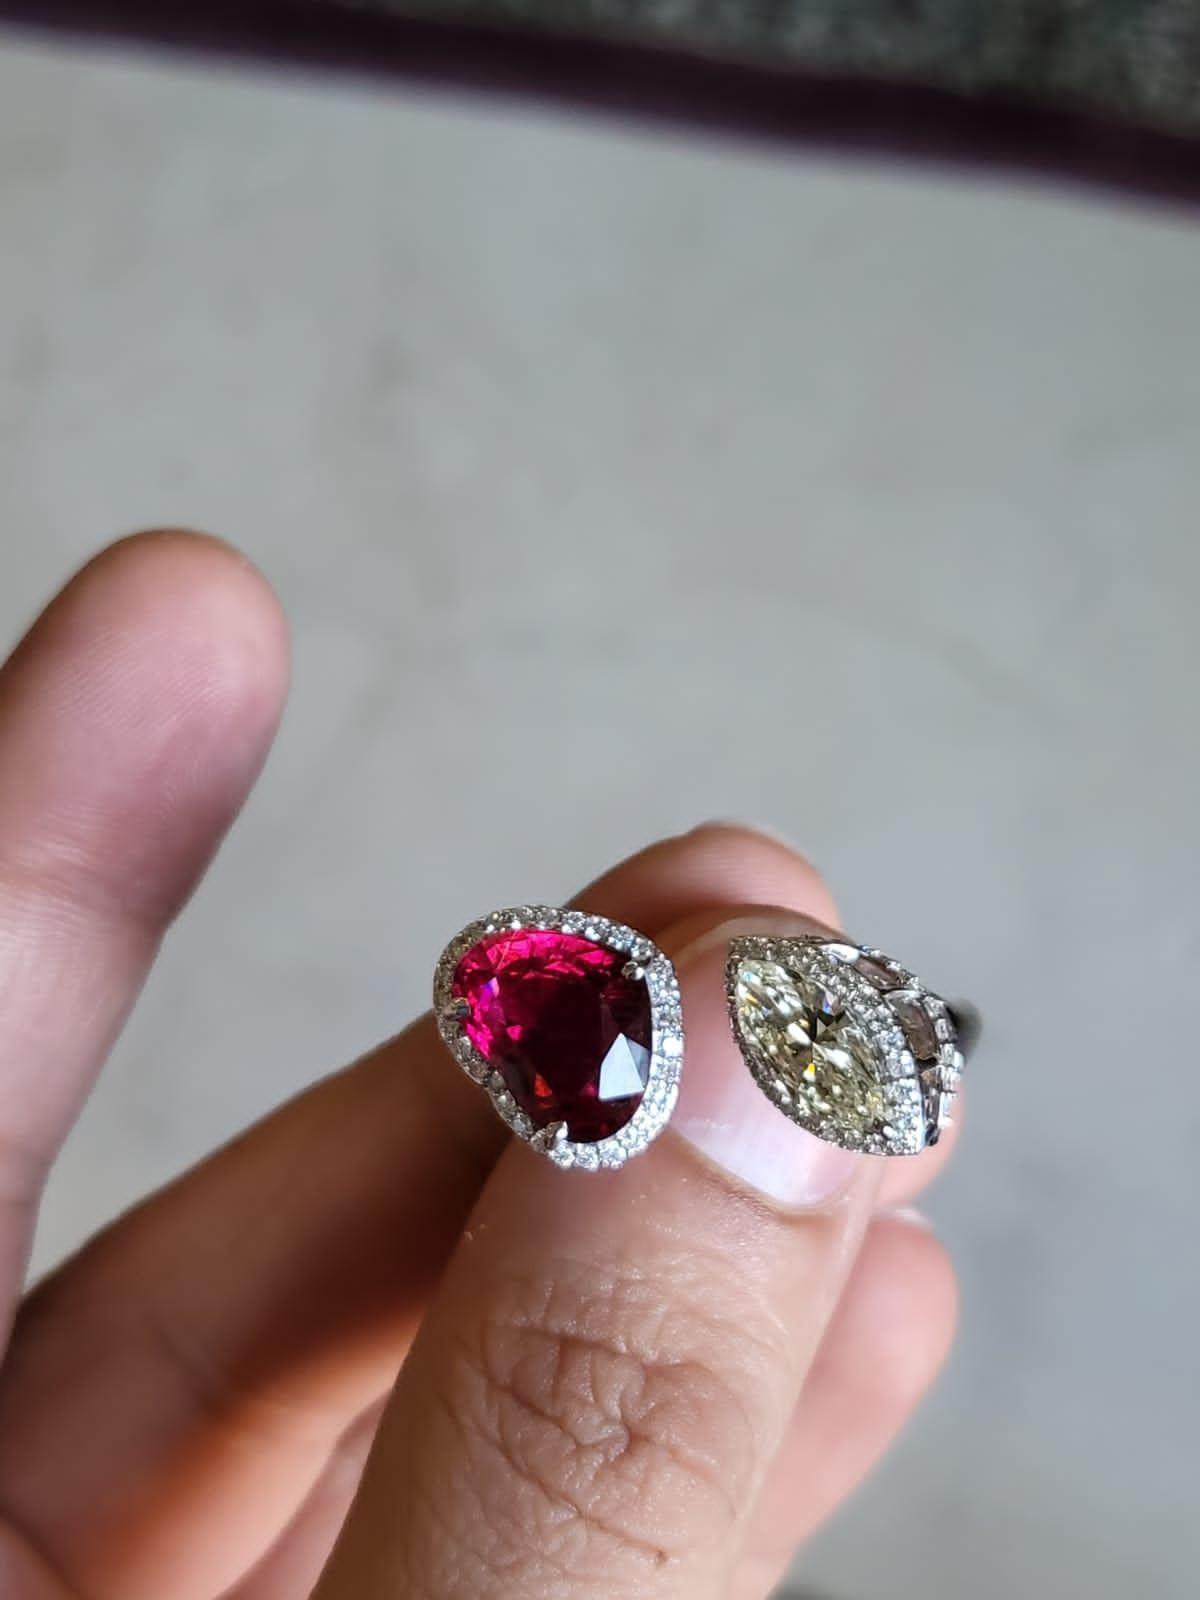 A very gorgeous ans of a kind, Rubellite Engagement Ring set in 18K White Gold & Diamonds. The weight of the heart shaped Rubellite is 4.36 carats. The weight of the Marquise Diamond is 1.05 carats. Other Diamonds weight is 0.75 carats. Net Gold